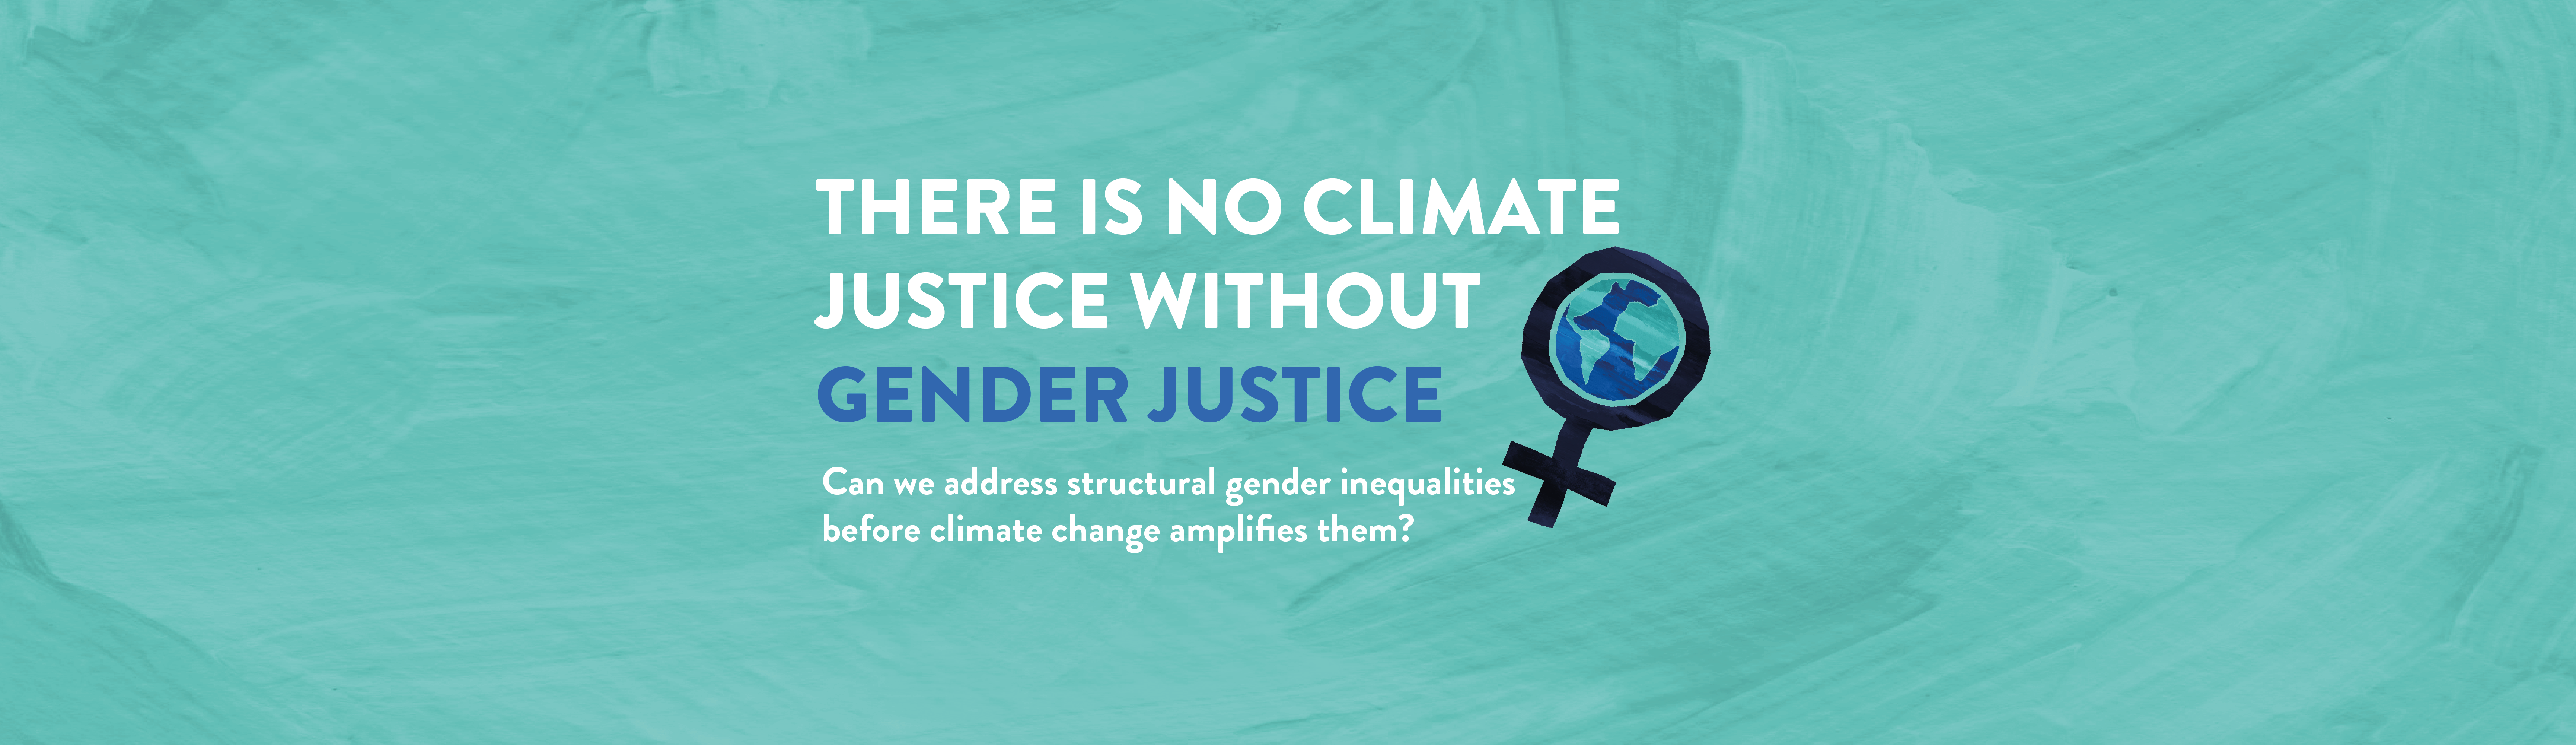 There is no climate justice without gender justice